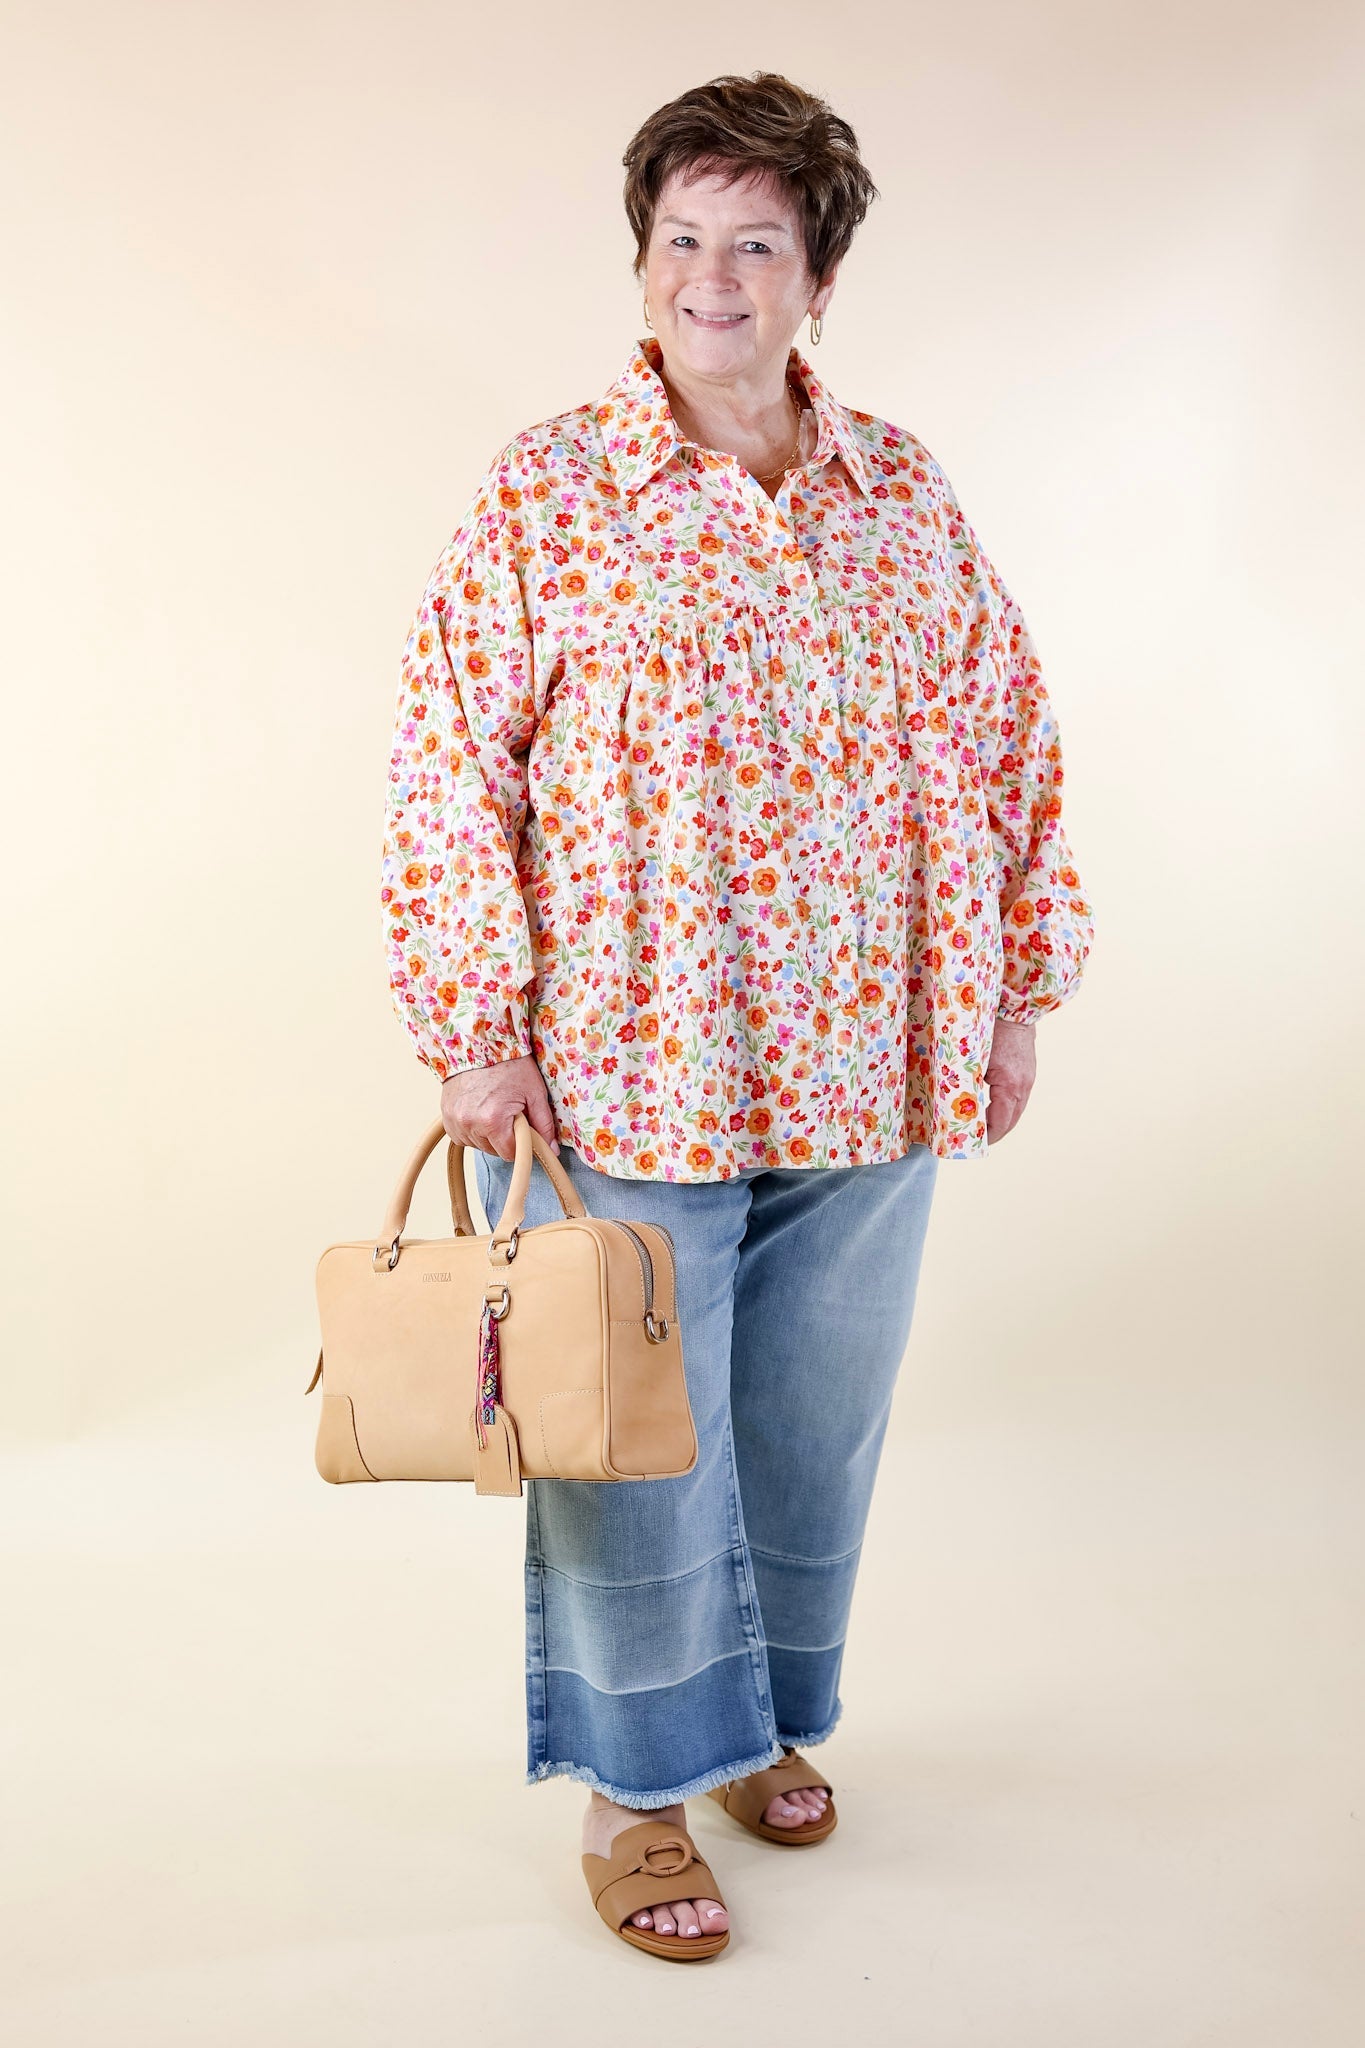 Secret Garden Floral Print Top with Collar and Long Sleeves in Cream - Giddy Up Glamour Boutique